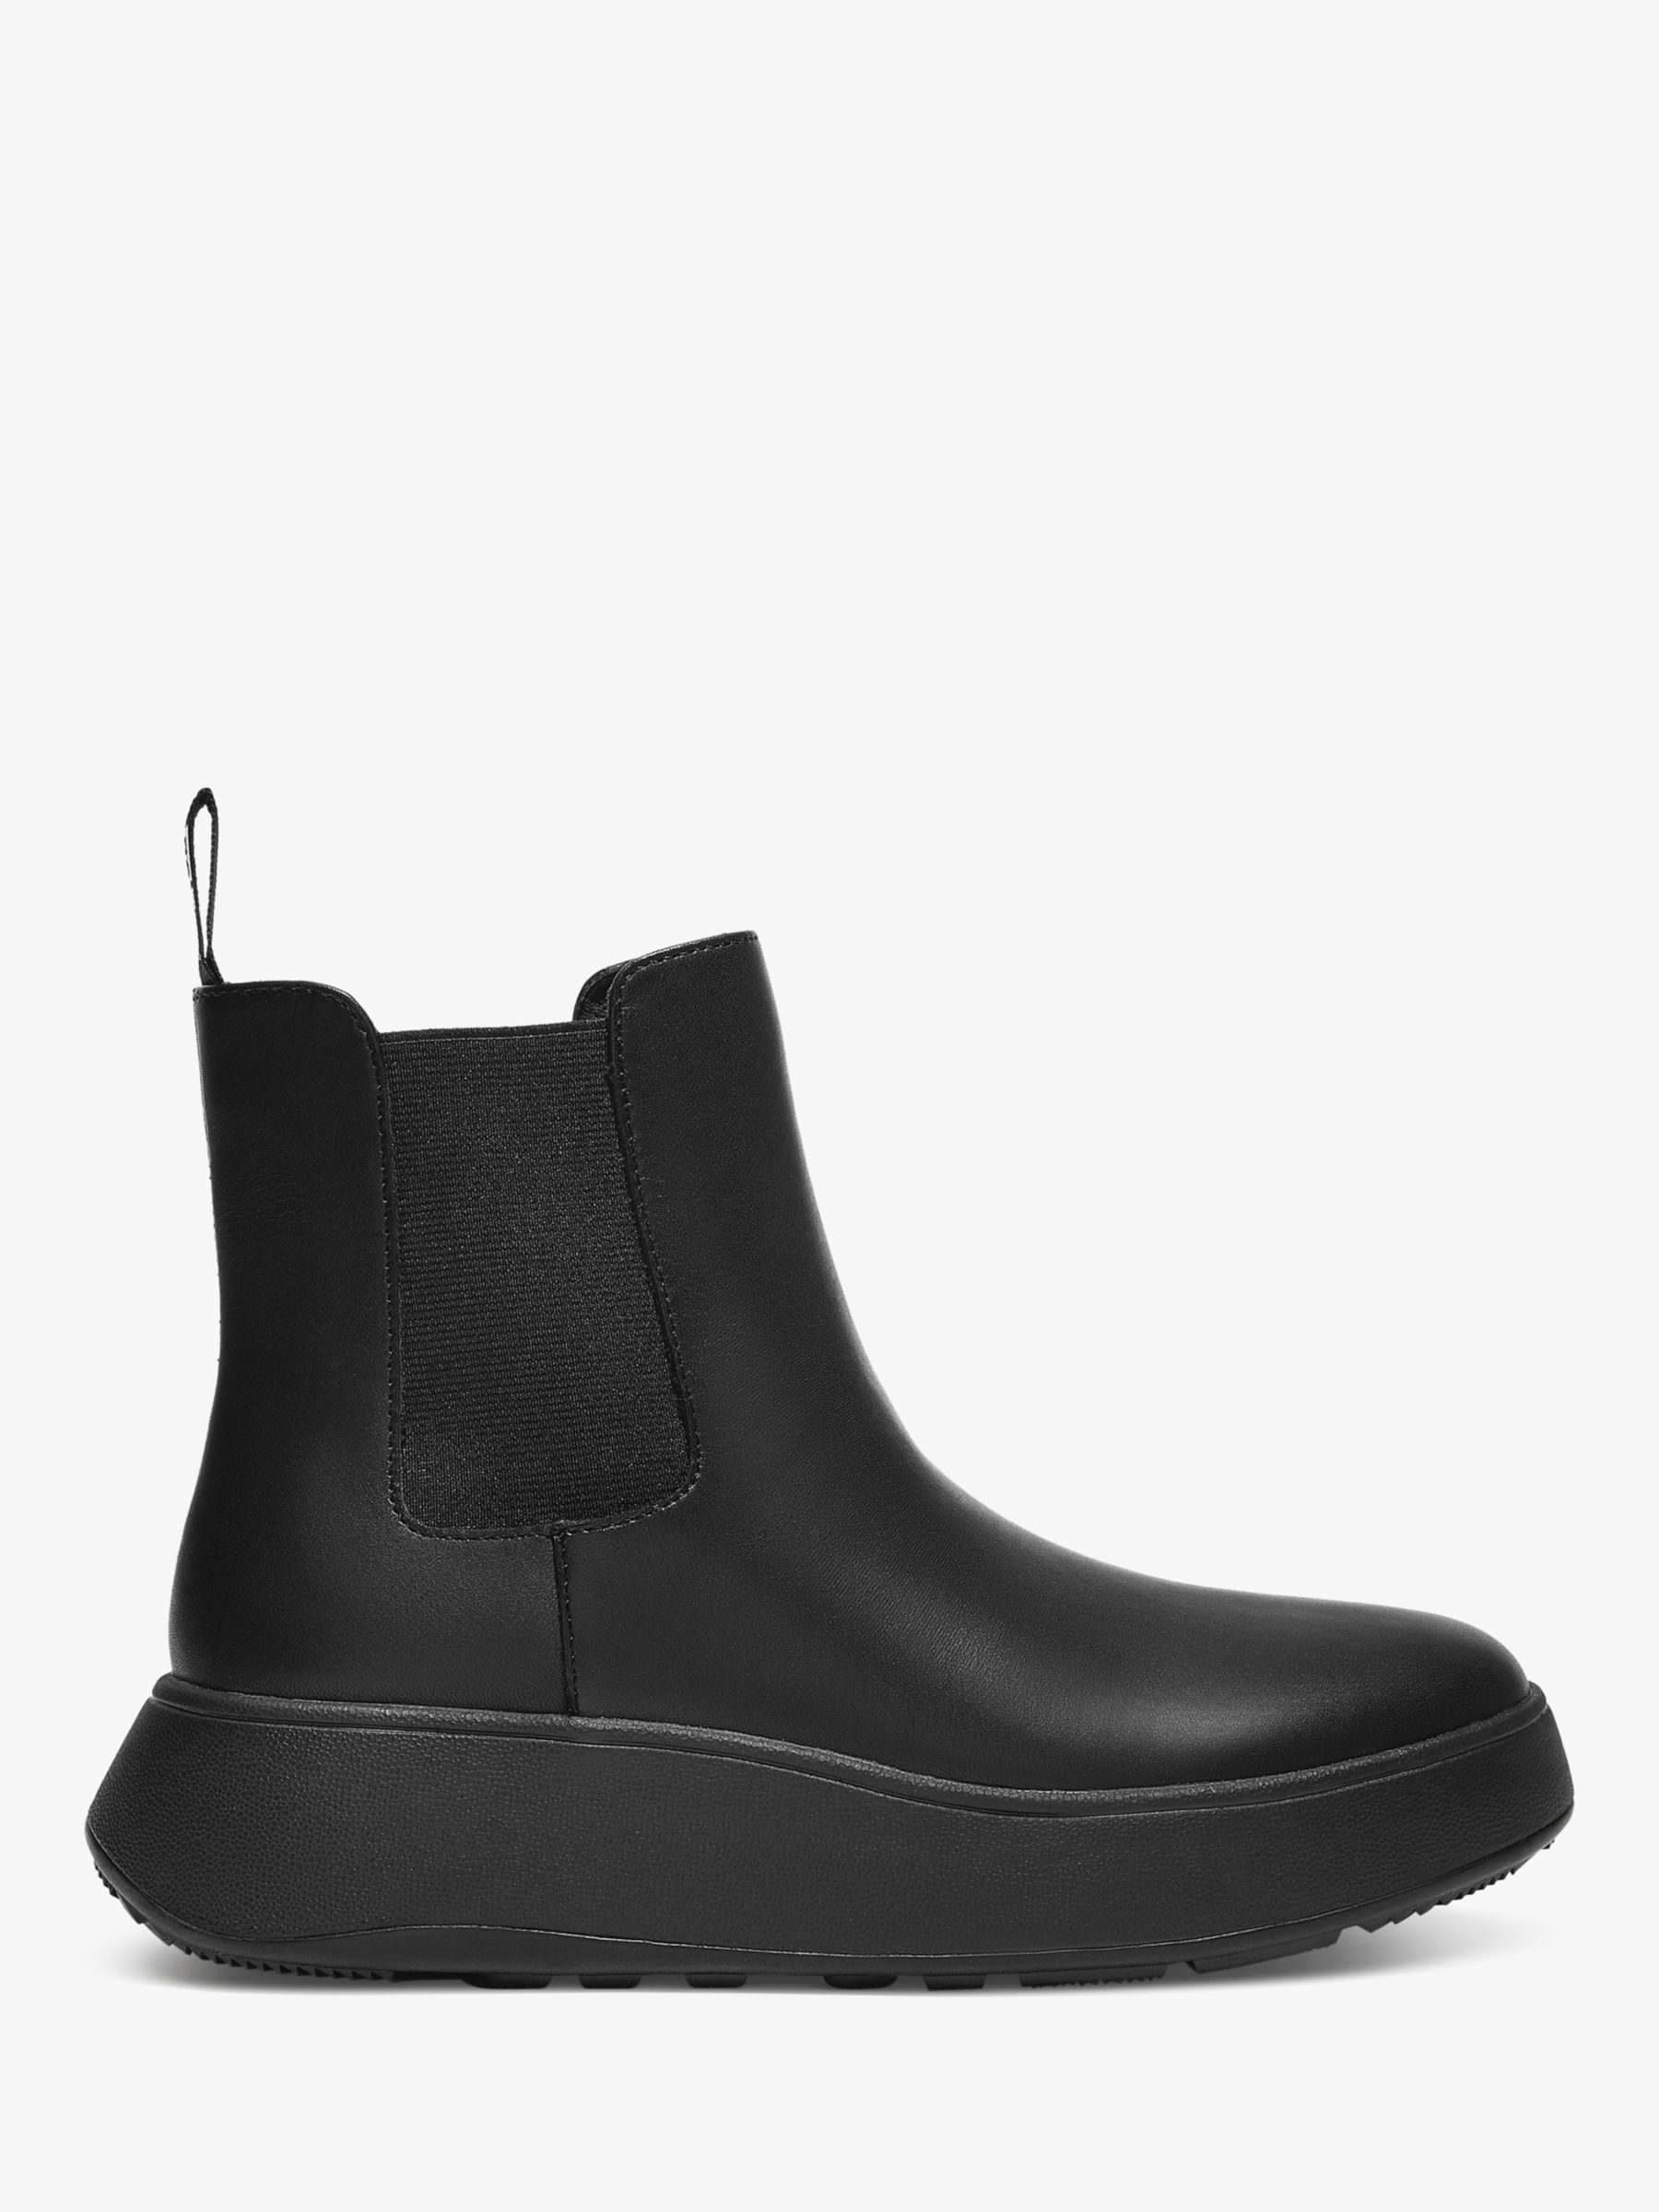 FitFlop Flatform Leather Ankle Boots, All Black, 3